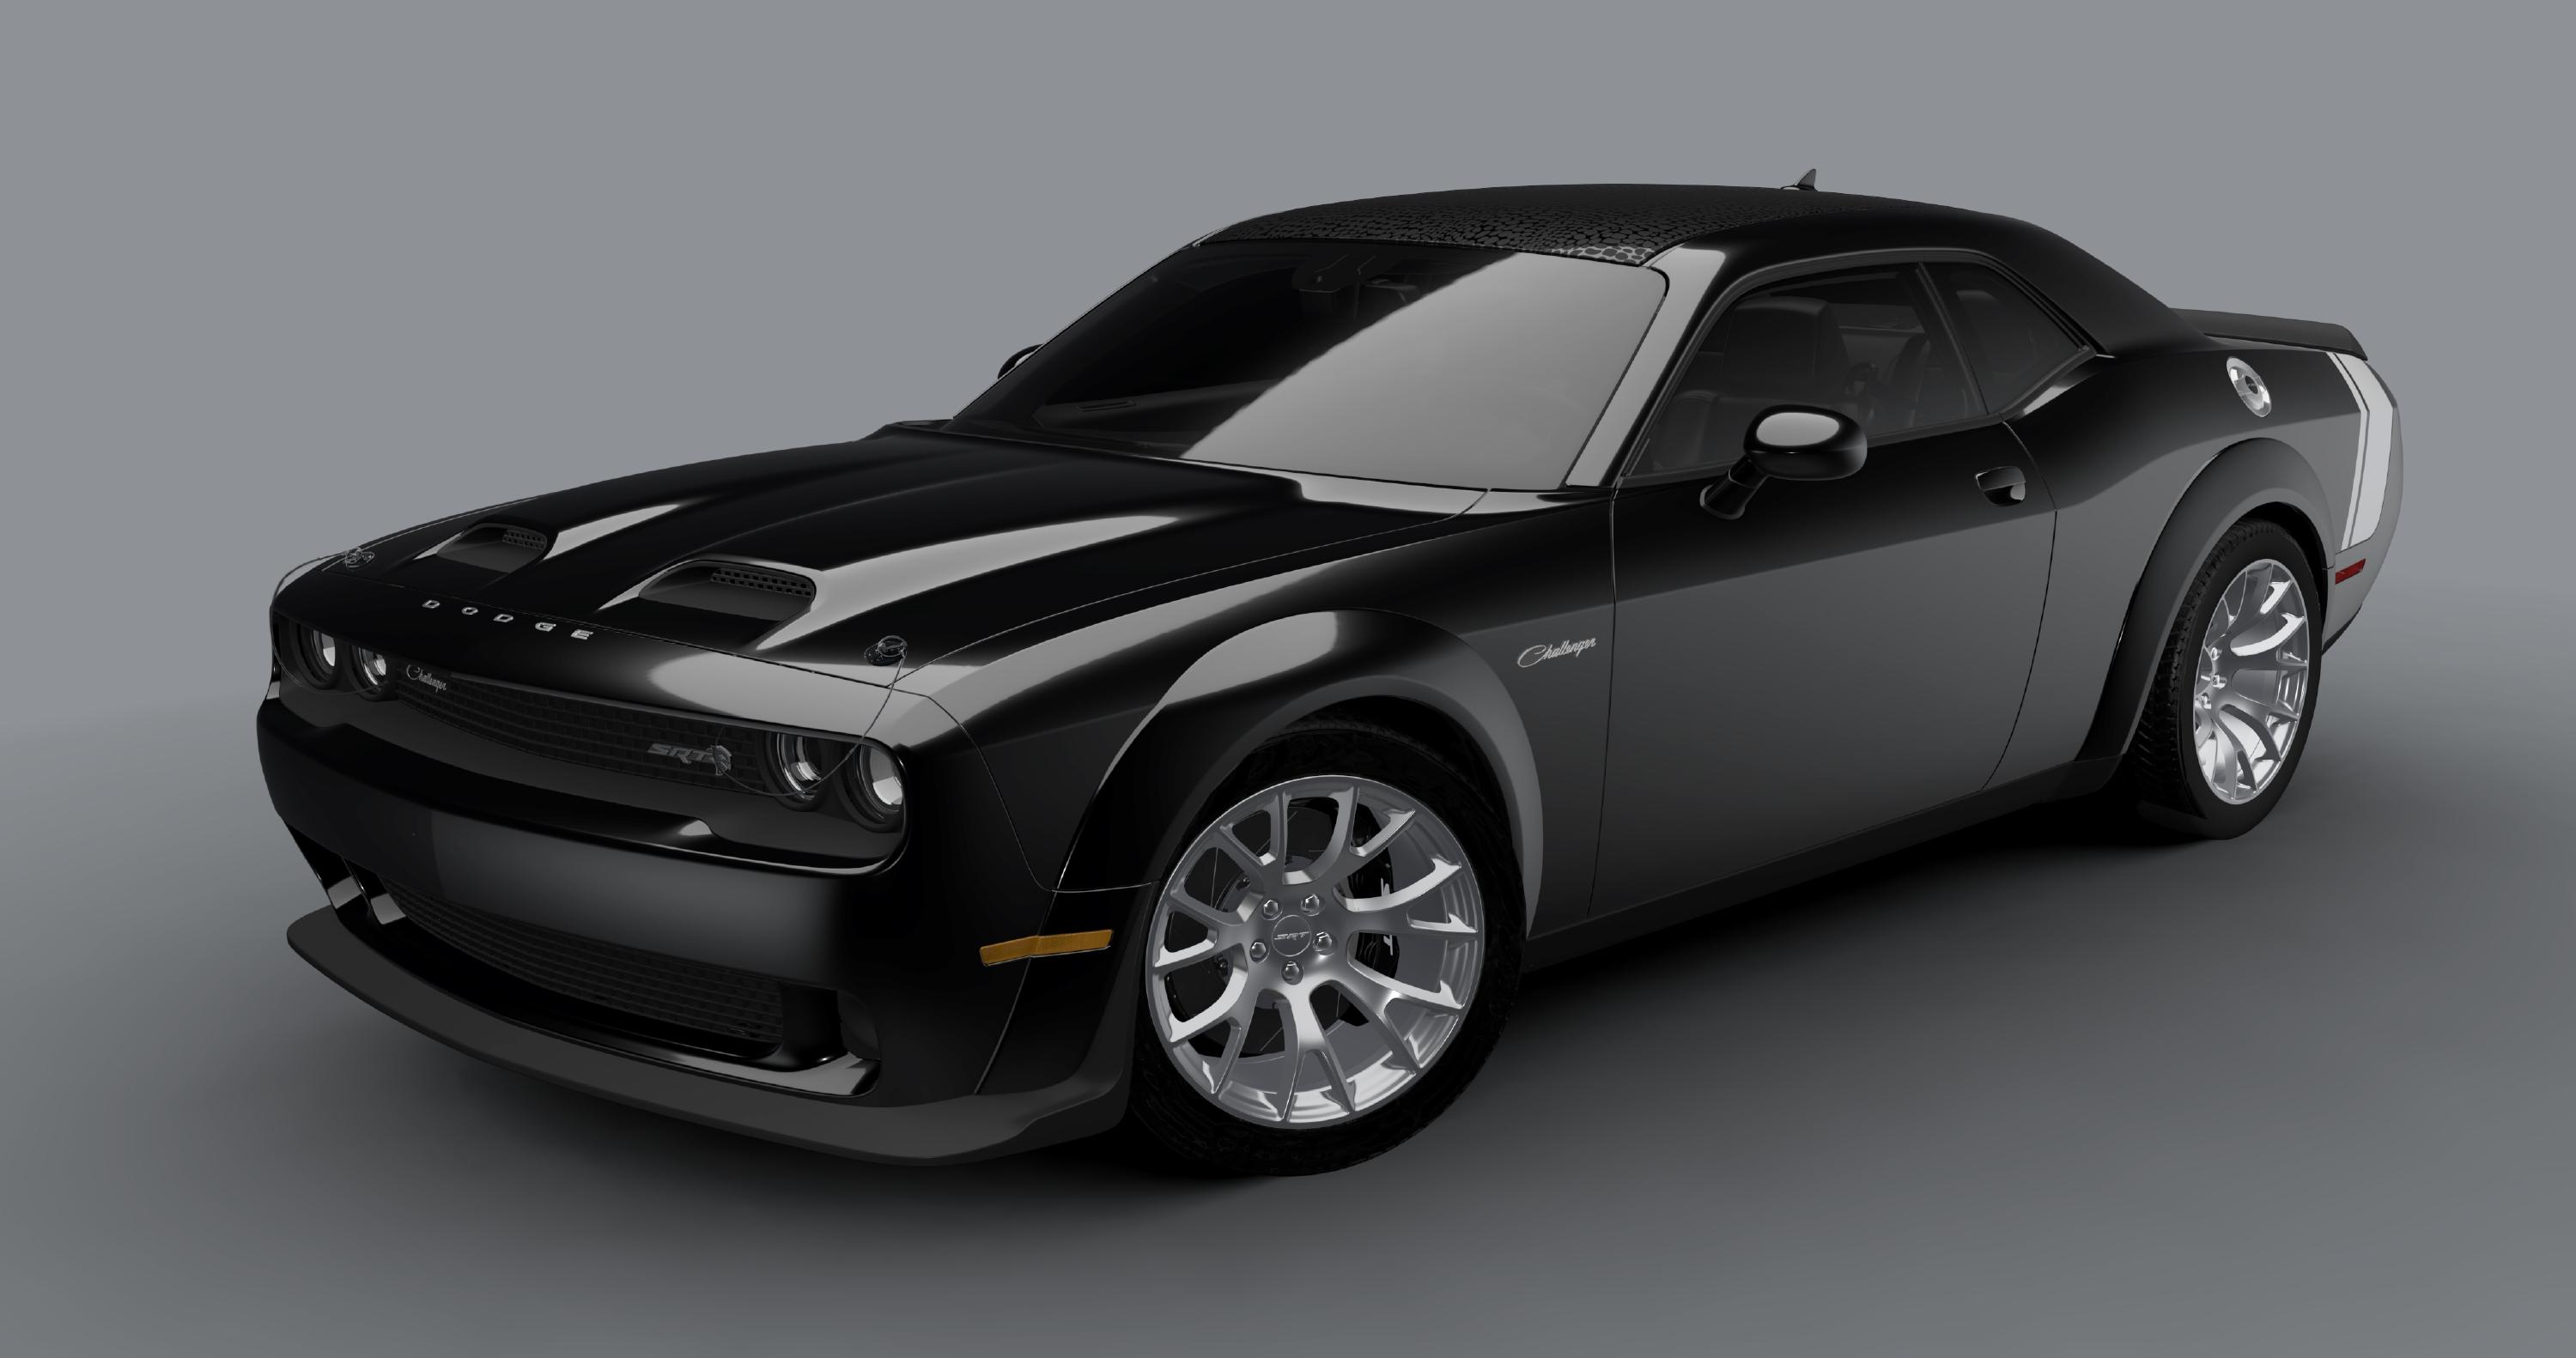 Two of Dodge's Last Call cars pay tribute to Black racers. That's no coincidence